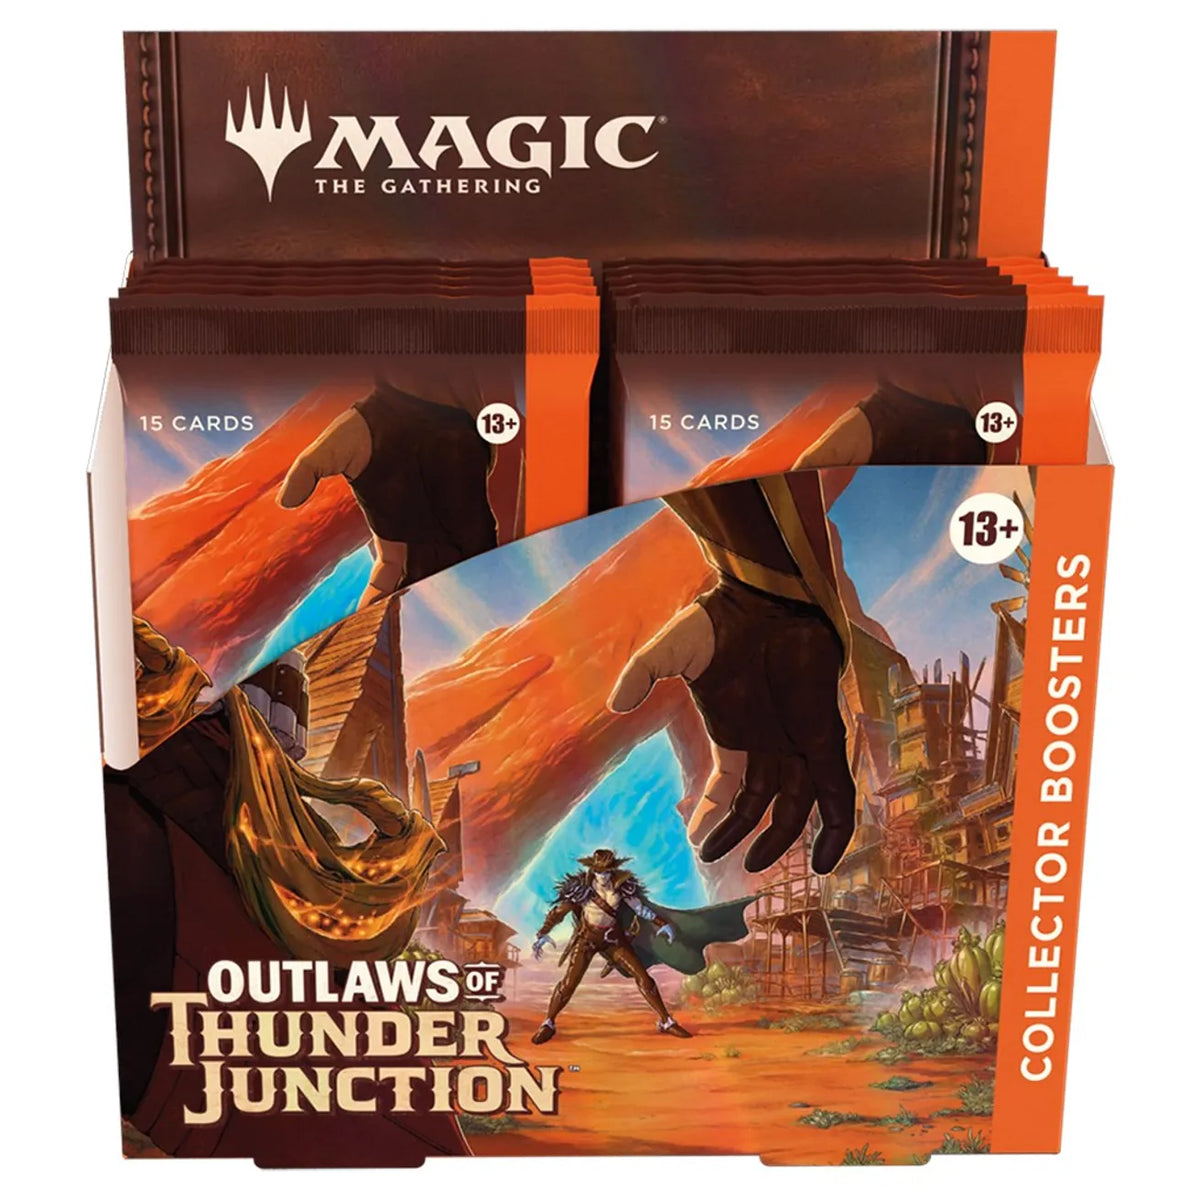 Magic The Gathering Outlaws of Thunder Junction Collector Booster Box